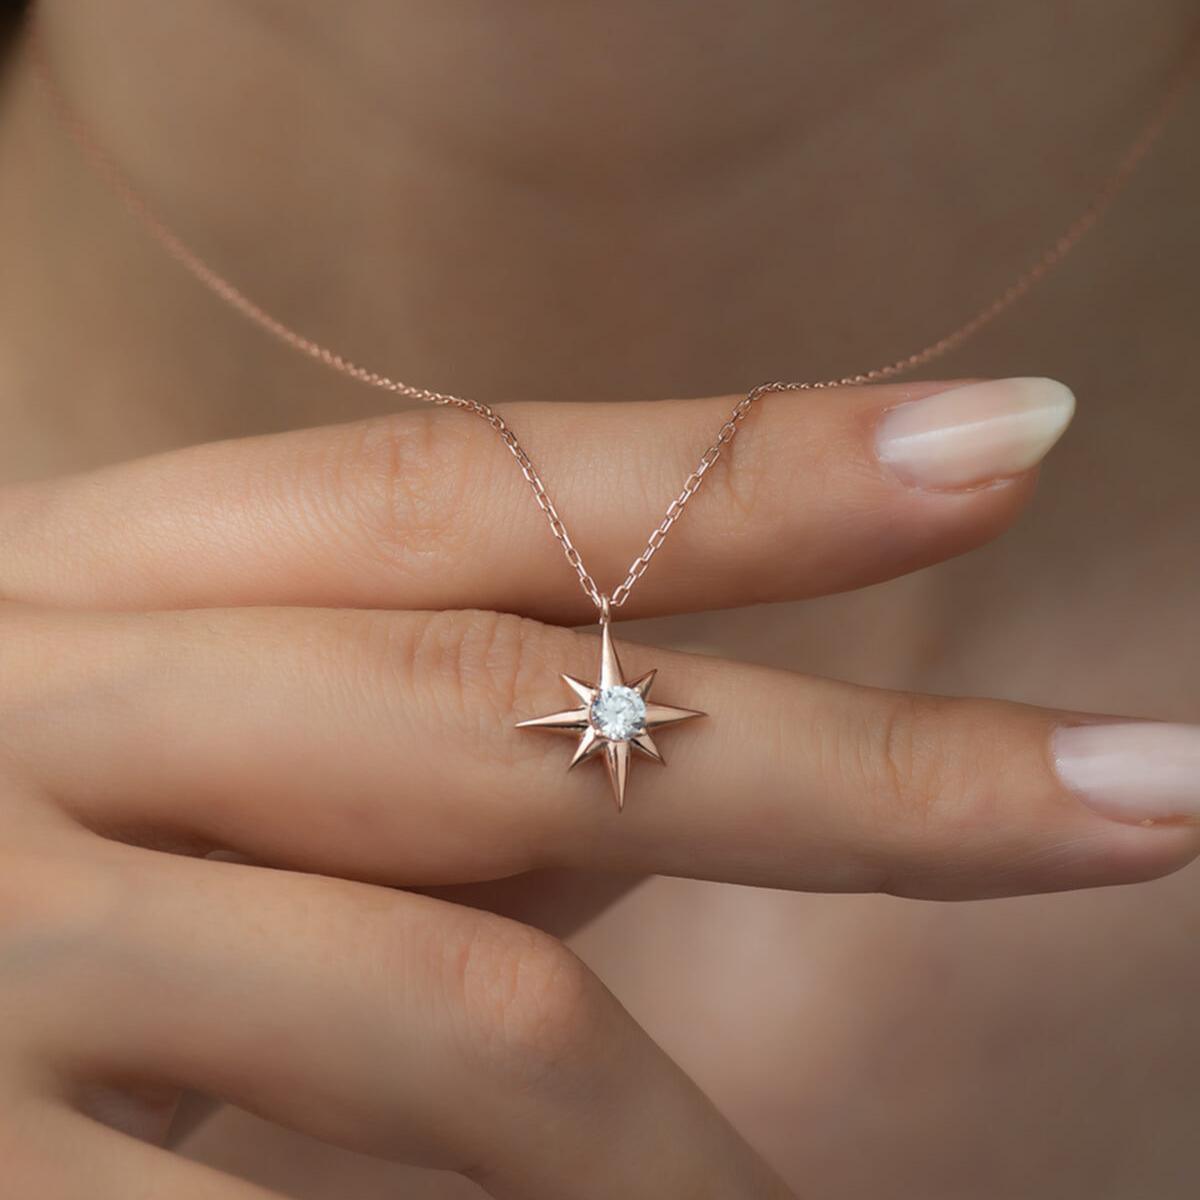 North Star Solitaire Necklace • Solitaire Diamond North Star Necklace - Trending Silver Gifts